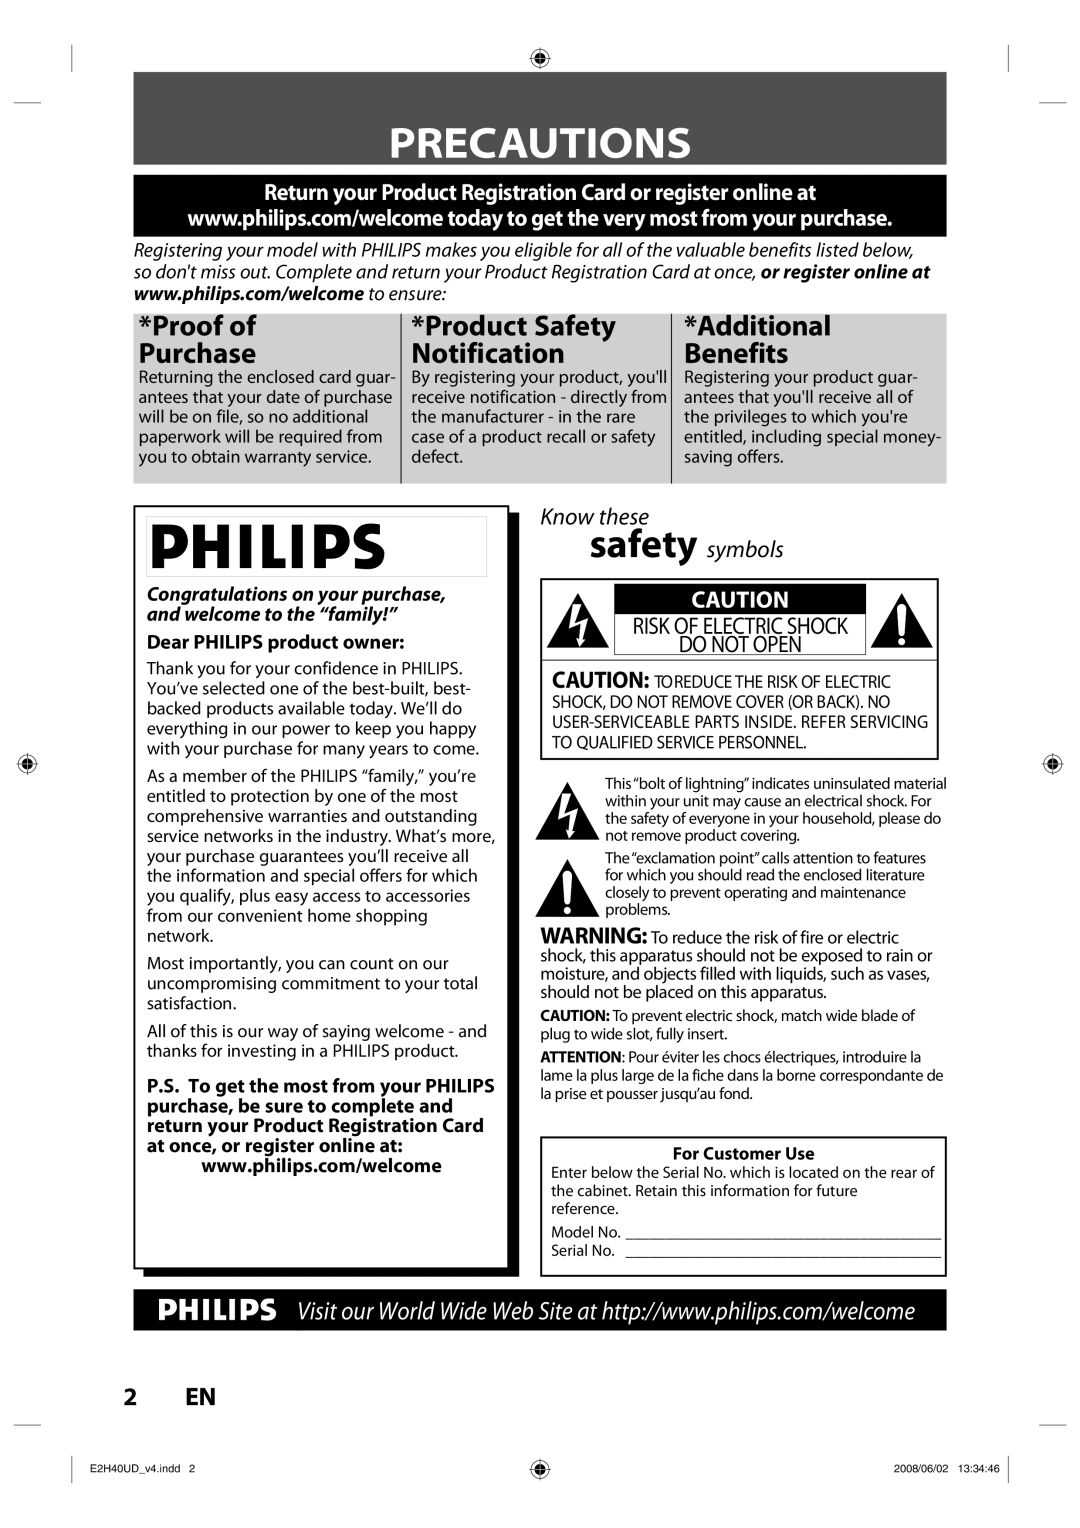 Philips DVDR3575H/37 manual Precautions, Proof of, Product Safety, Additional, Purchase, Notification, Benefits, 2 EN 